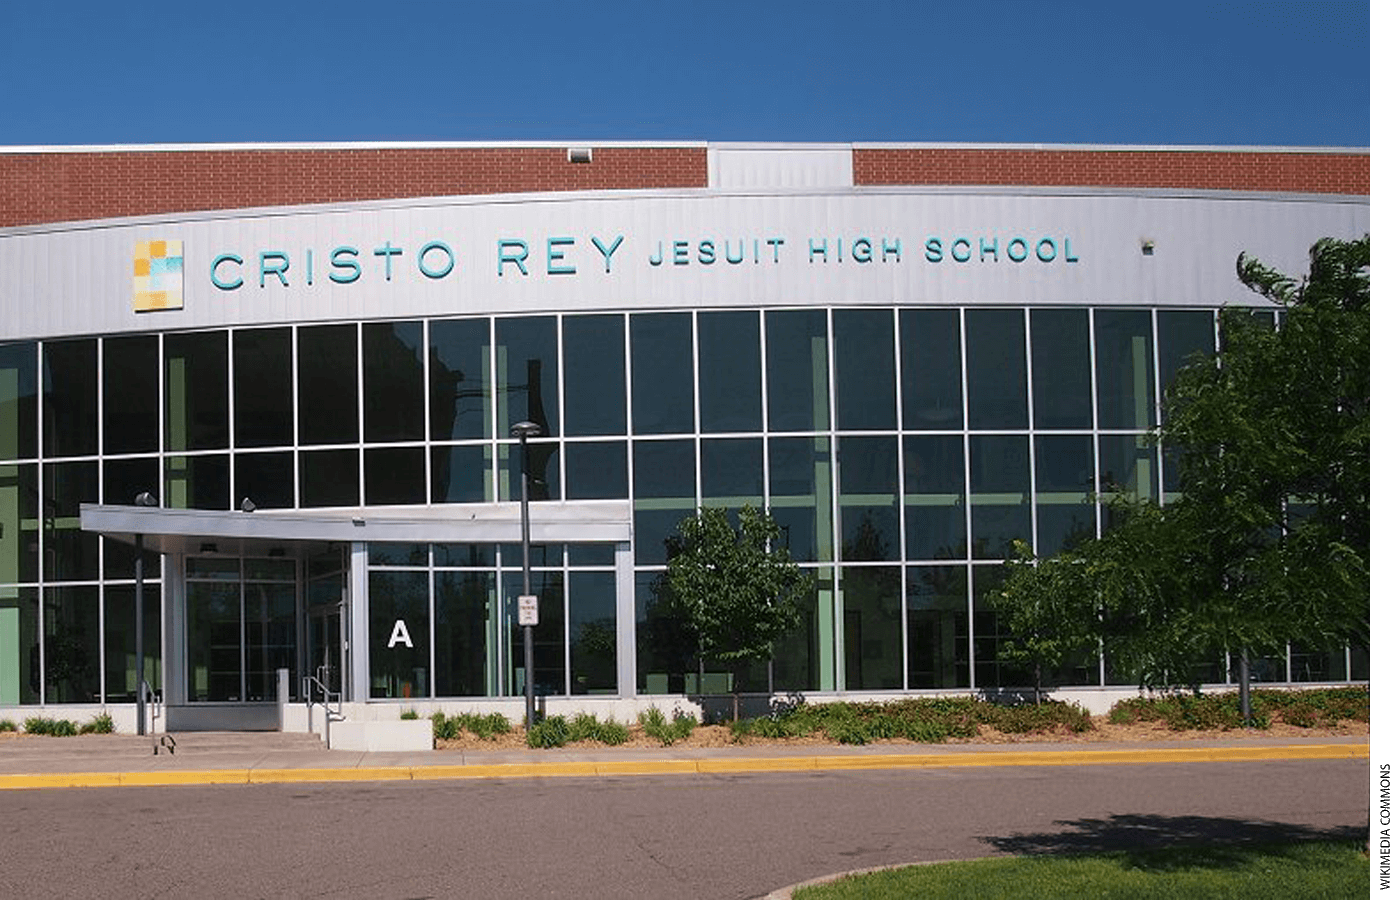 Cristo Rey, founded in 1996, is a network of 37 Catholic schools enrolling 12,000 students in 24 states.